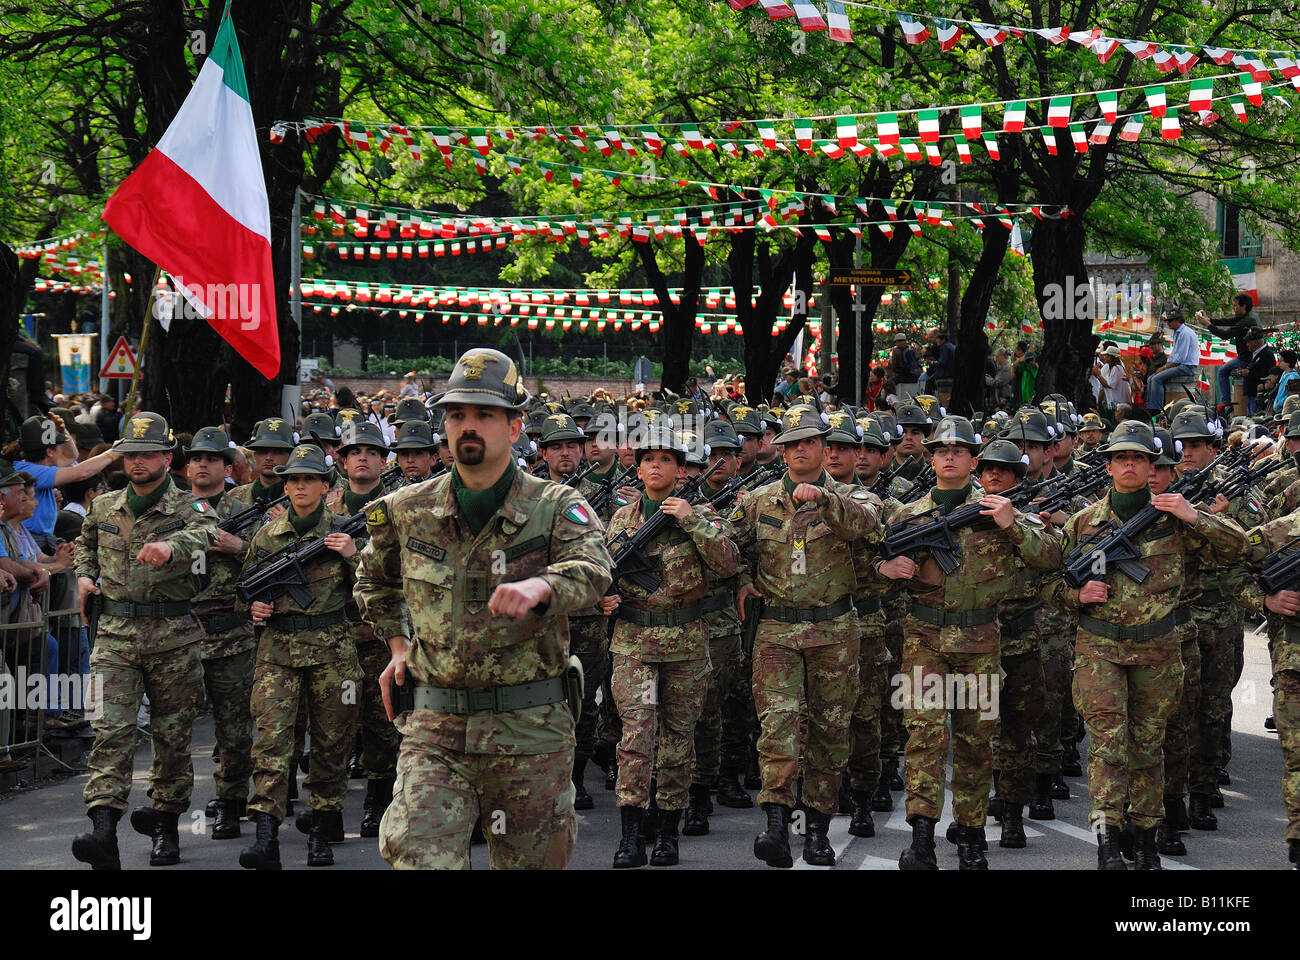 81.Alpini National Gathering 9-10-11 May 2008,Bassano del Grappa Italy.The soldiers march past Stock Photo